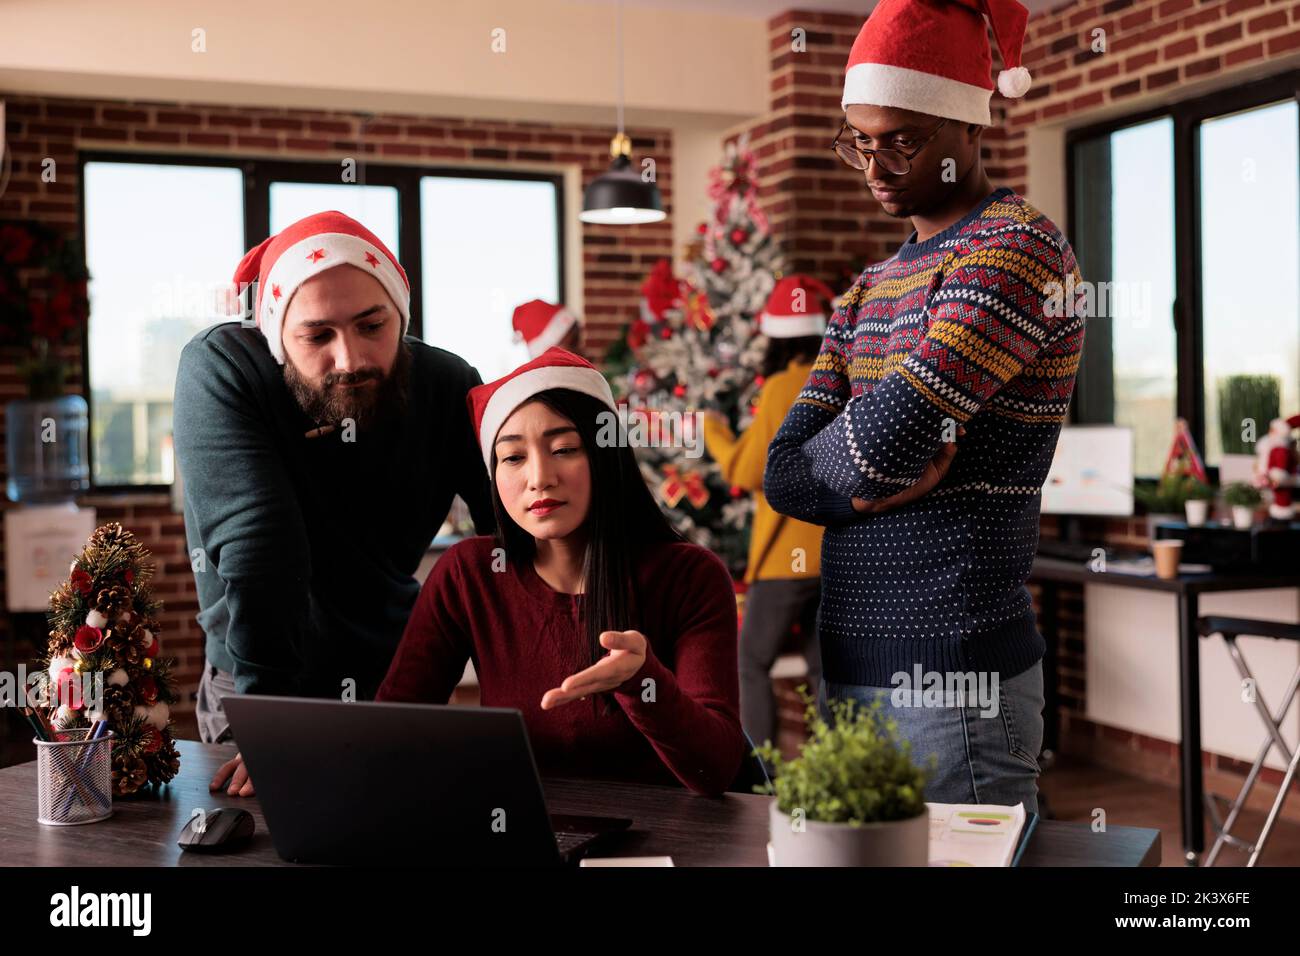 Diverse group of people working during christmas eve, doing teamwork to plan business project in office with xmas lights and festive decorations. Using laptop at job, seasonal winter holiday. Stock Photo